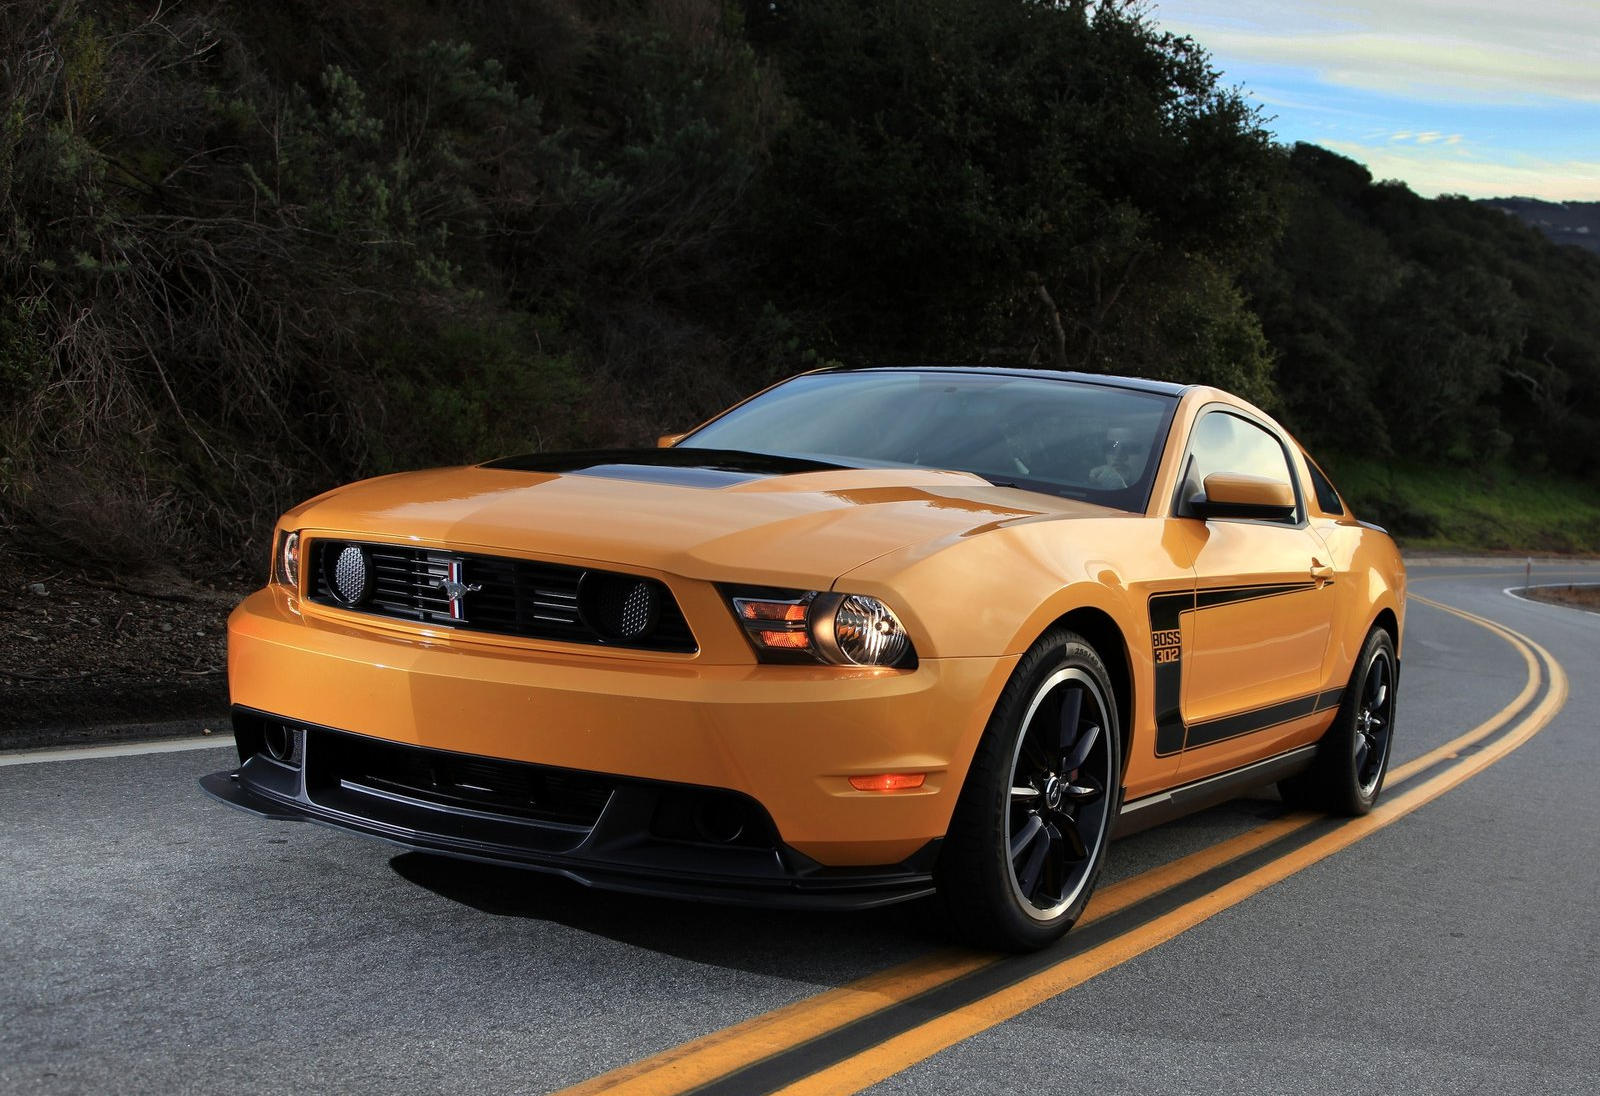 Used 2012 Ford Mustang Boss 302 For Sale Near Me CarBuzz